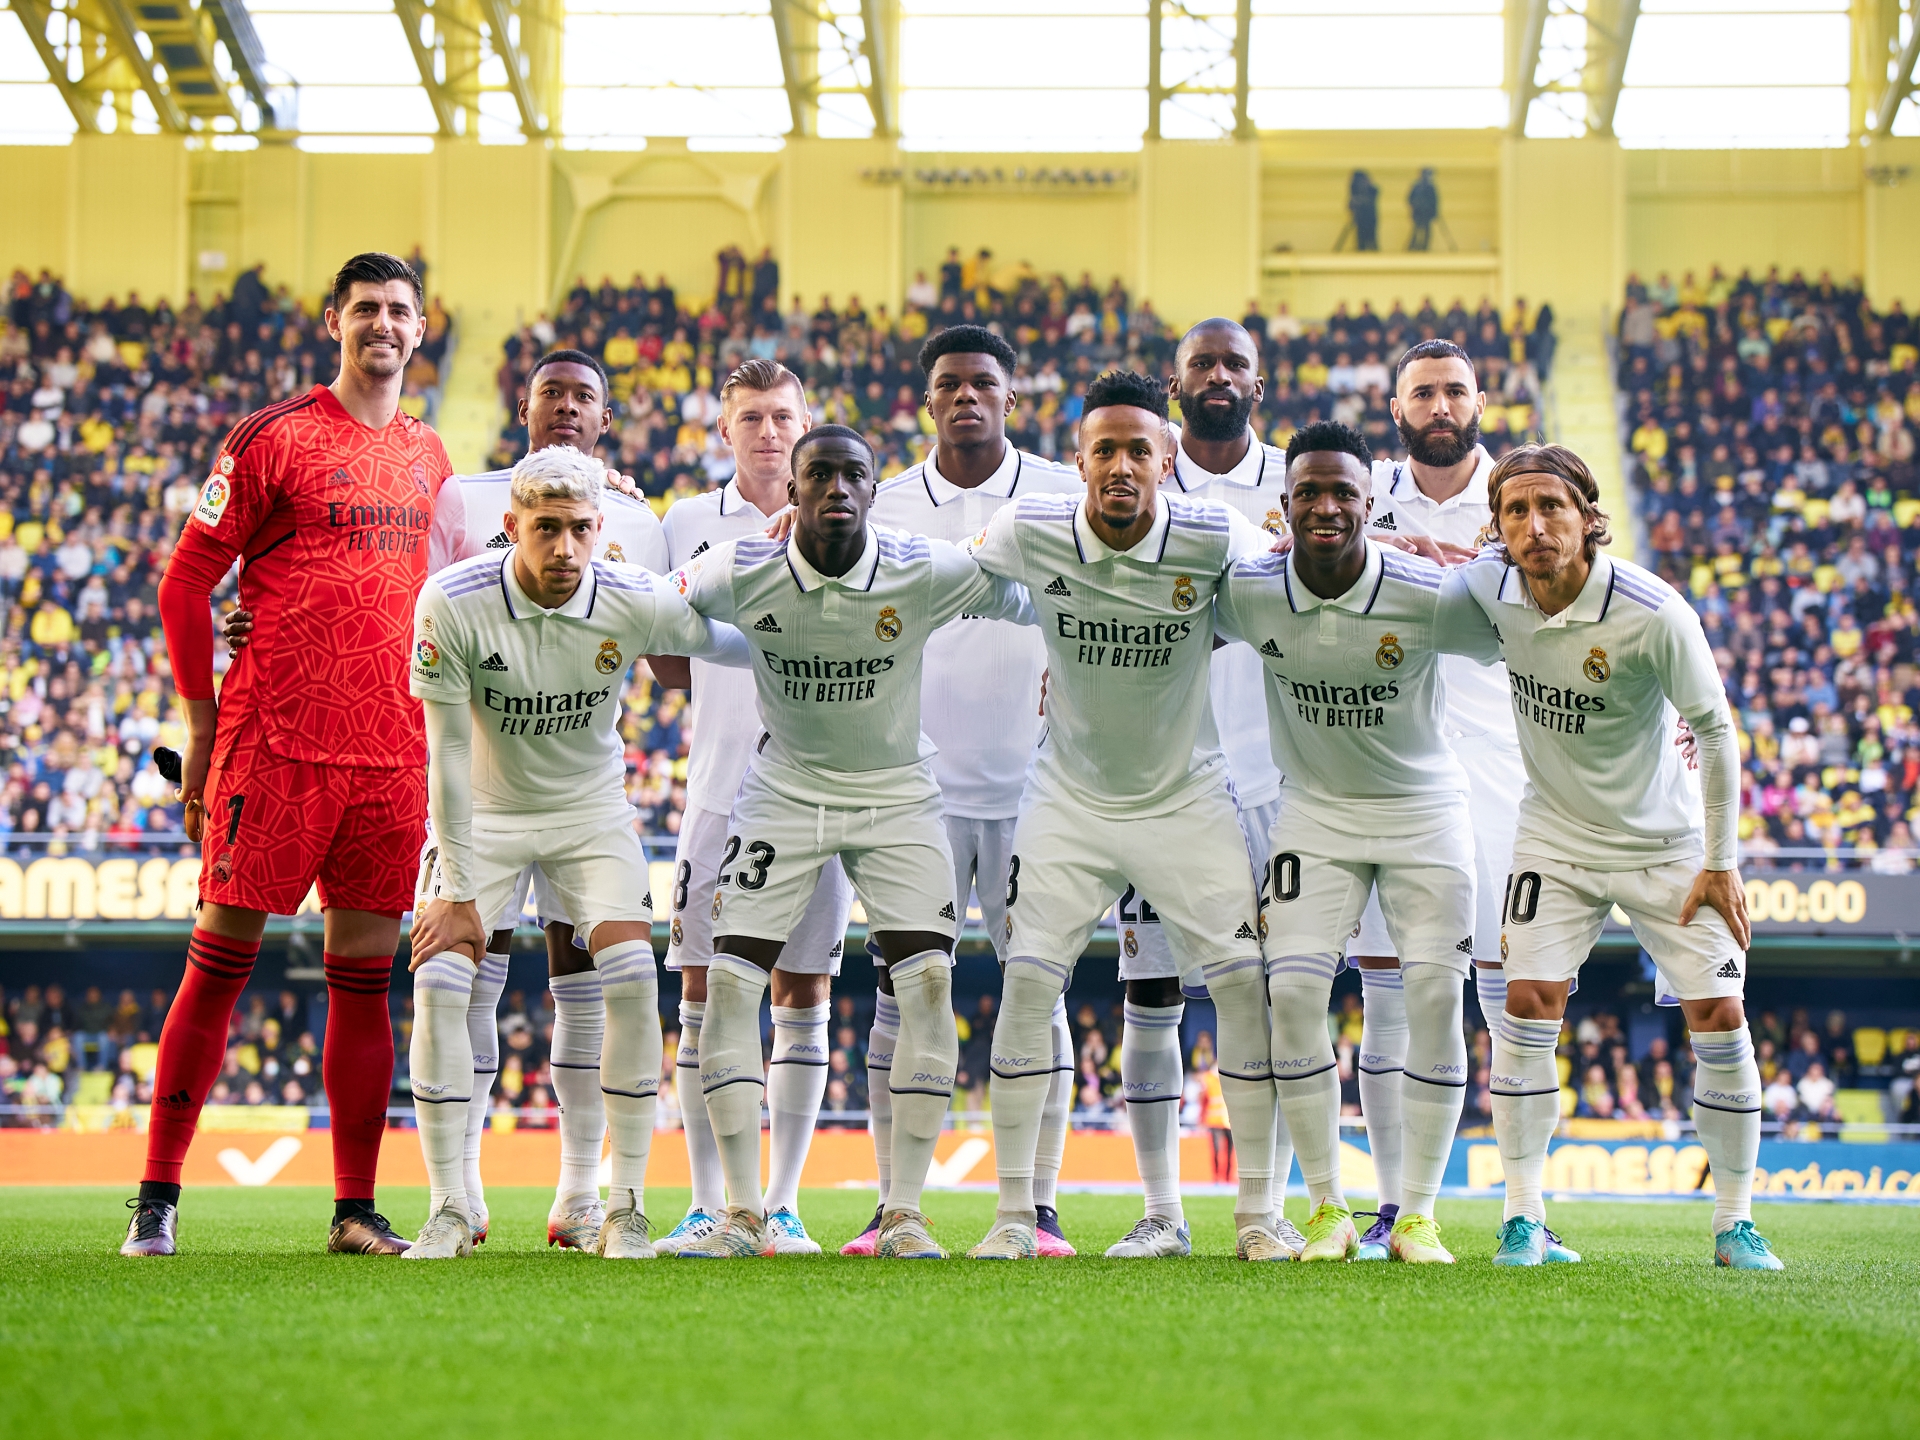 Real Madrid Field Unique Team That Shatters 121 Year Record For LaLiga Clash Vs Villarreal. And Then Lose 2 1